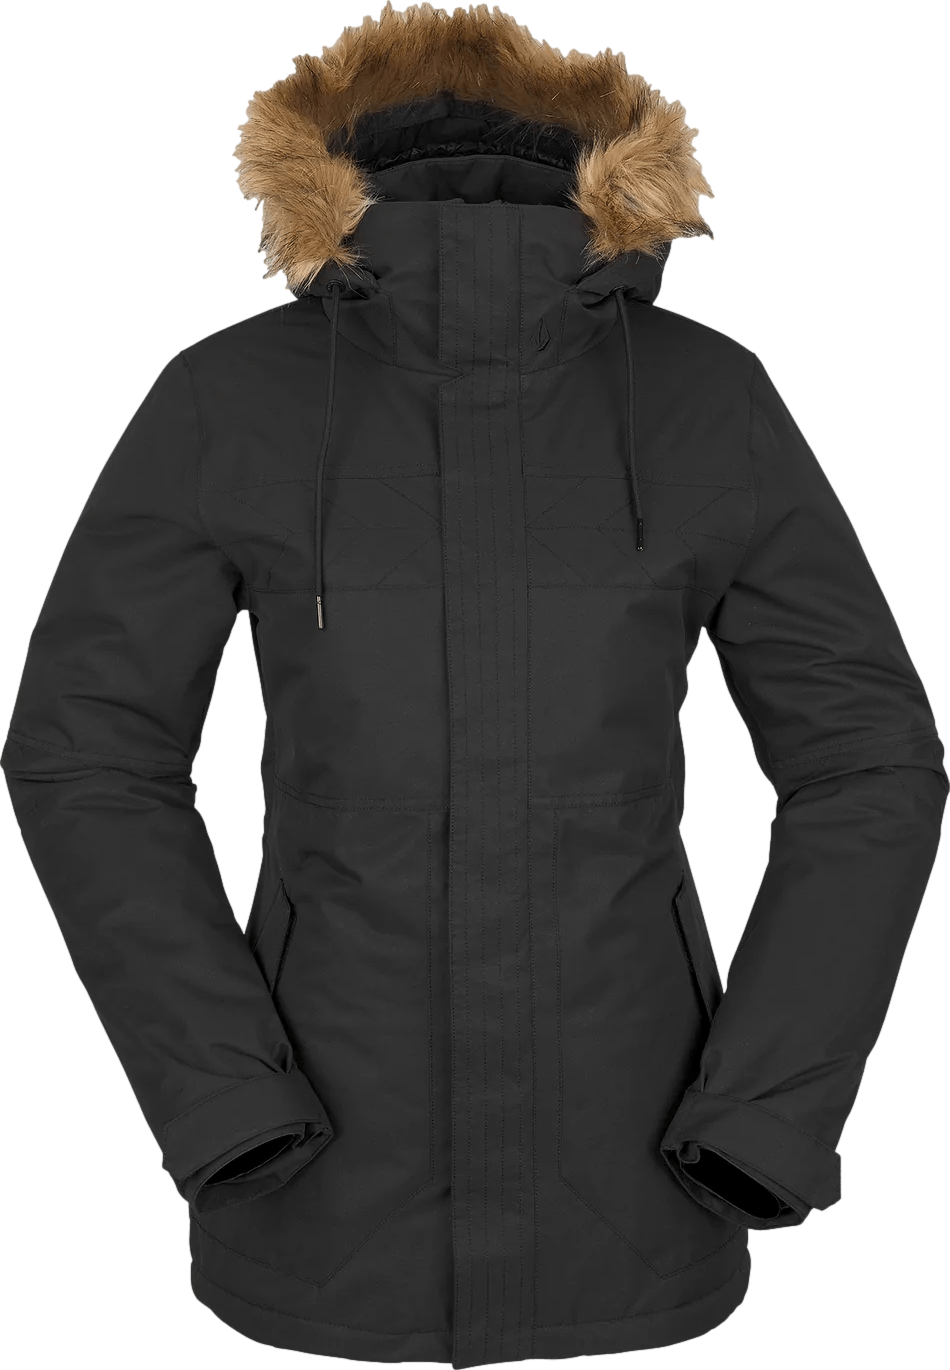 Volcom Fawn Insulated Jacket